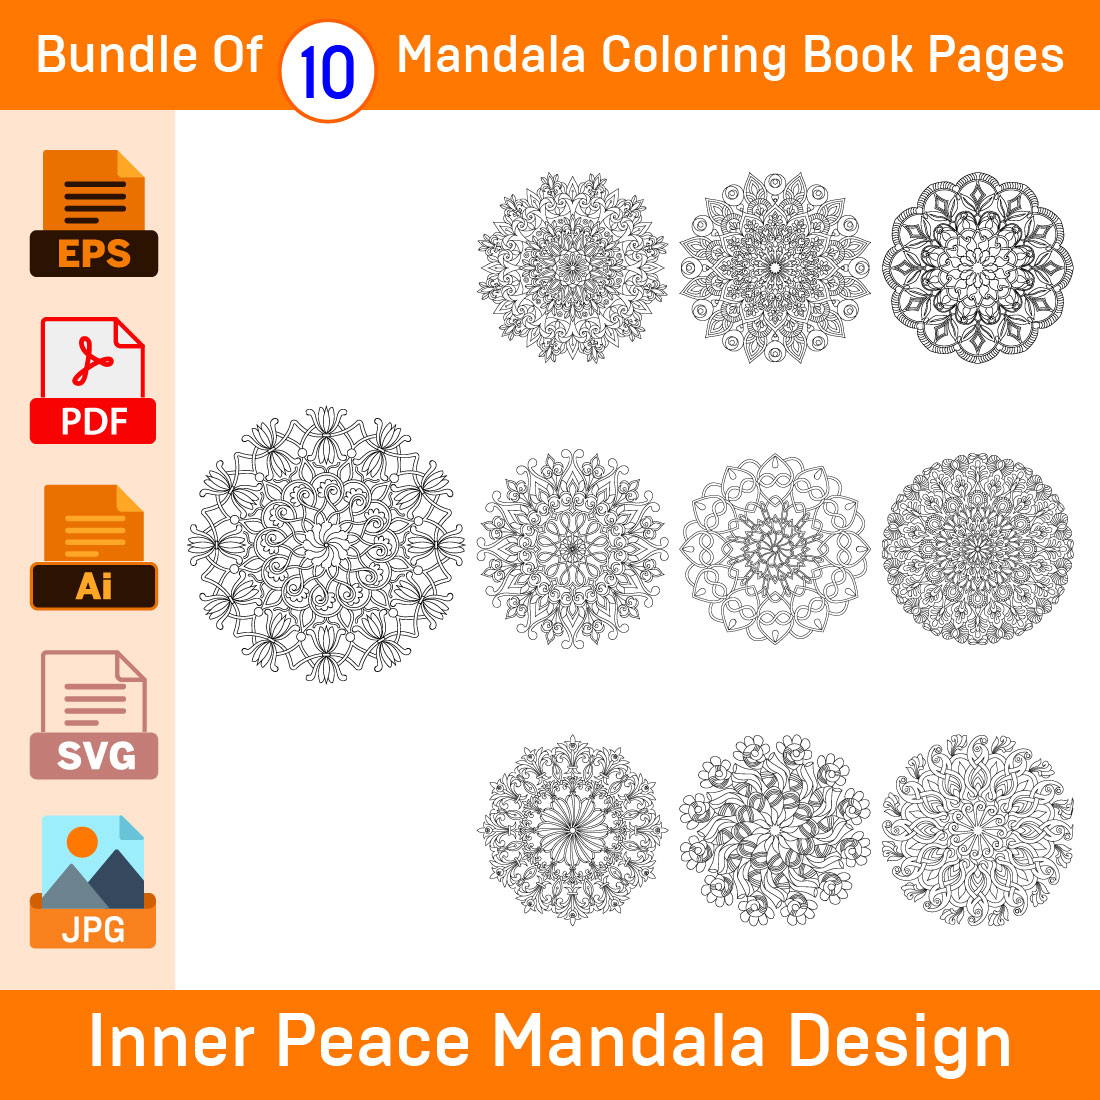 Bundle of 10 Inner Peace Mandala Coloring Book Pages cover image.